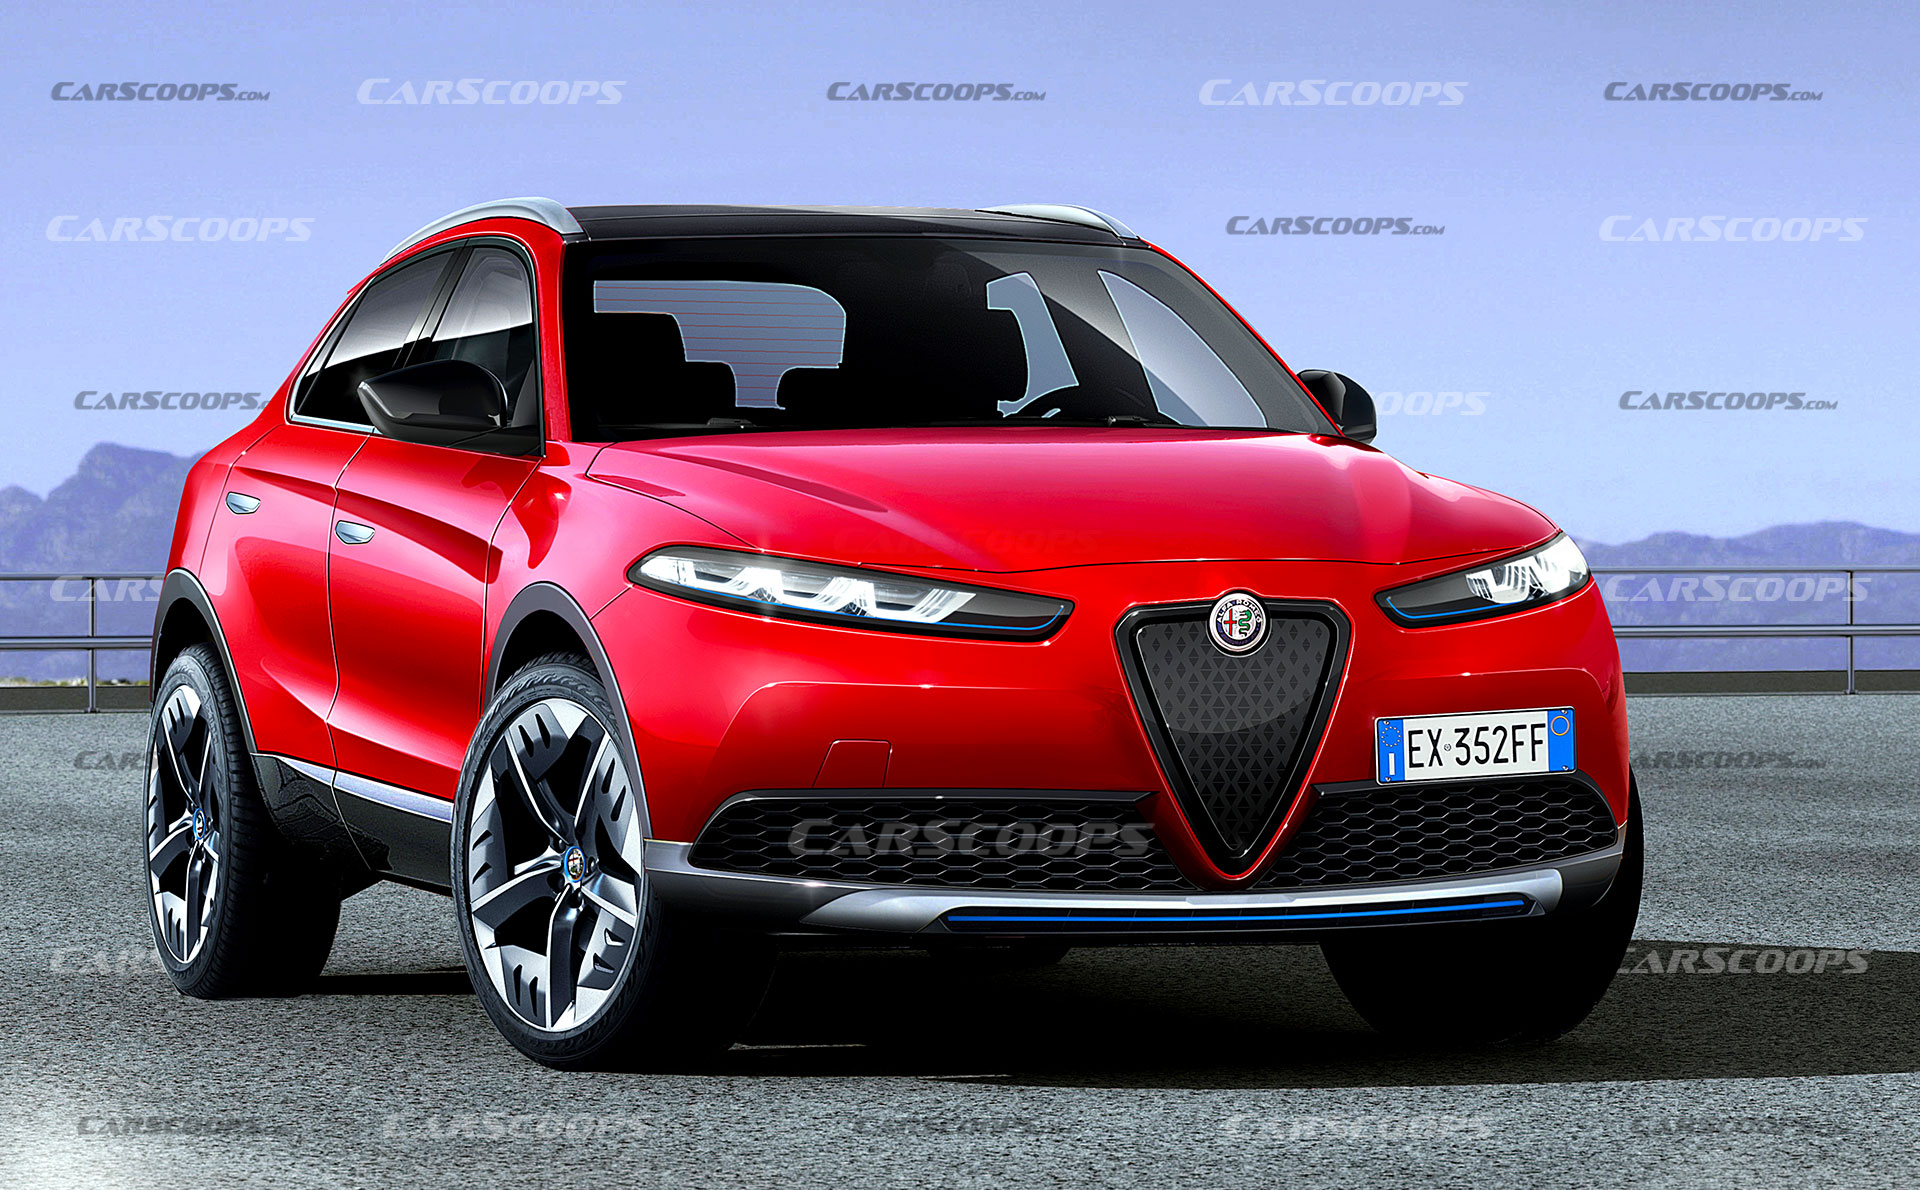 2022 Alfa Romeo Palade Here’s Everything We Know About The Stylish